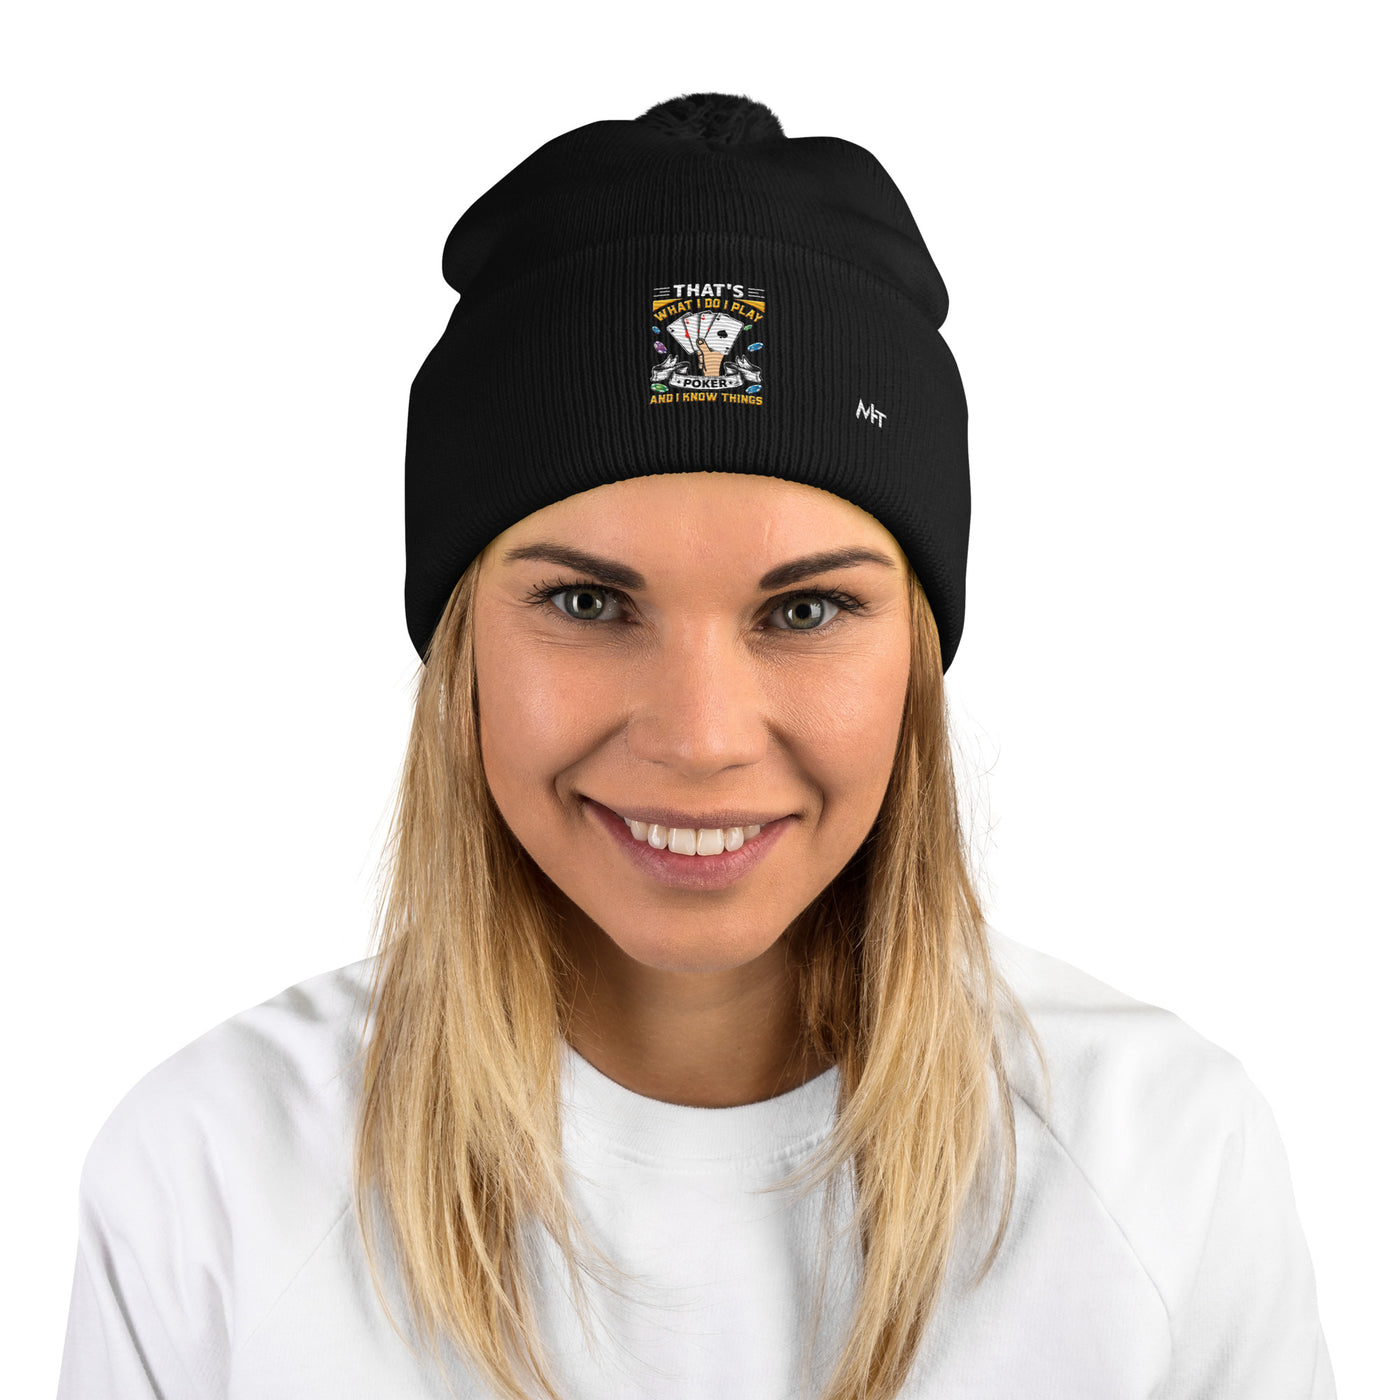 That's what I Do; I Play Poker and I Know Things - Pom-Pom Beanie